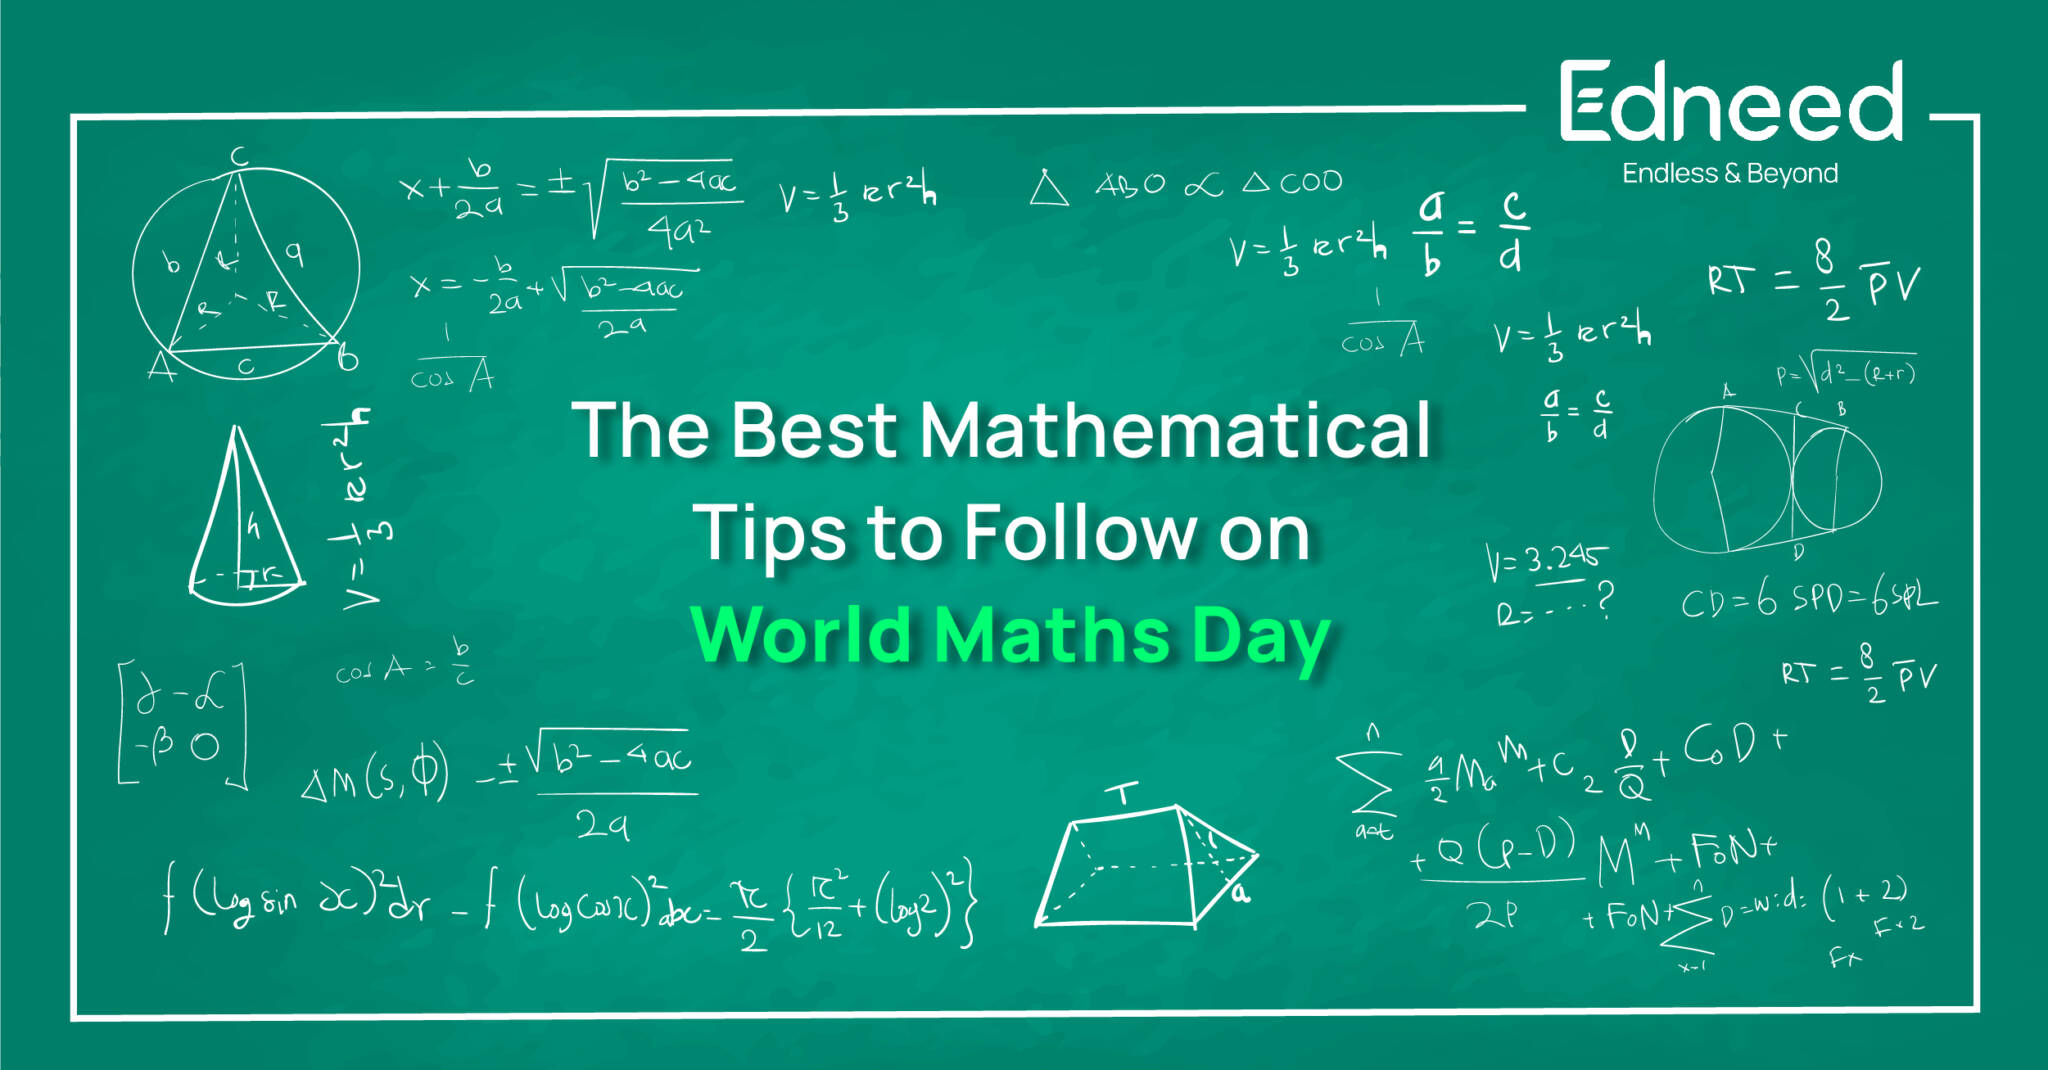 the-best-mathematical-tips-to-follow-on-world-maths-day-edneed-blog